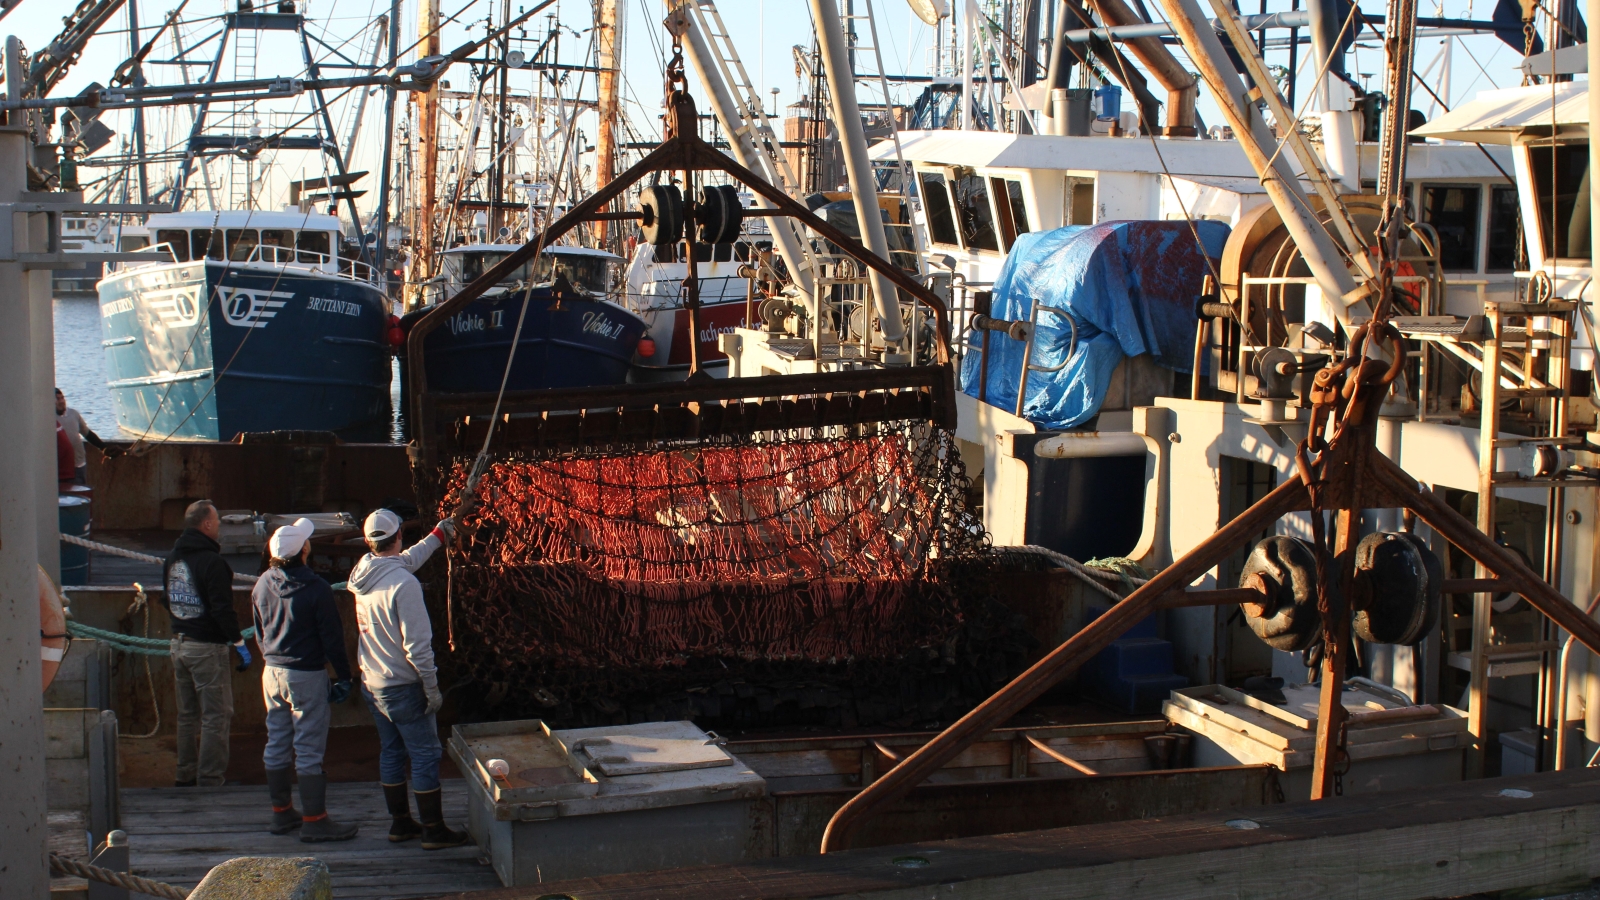 The fishing industry employs more than 6,000 people in New Bedford, and scallops account for more than 80% of the port's seafood revenue.